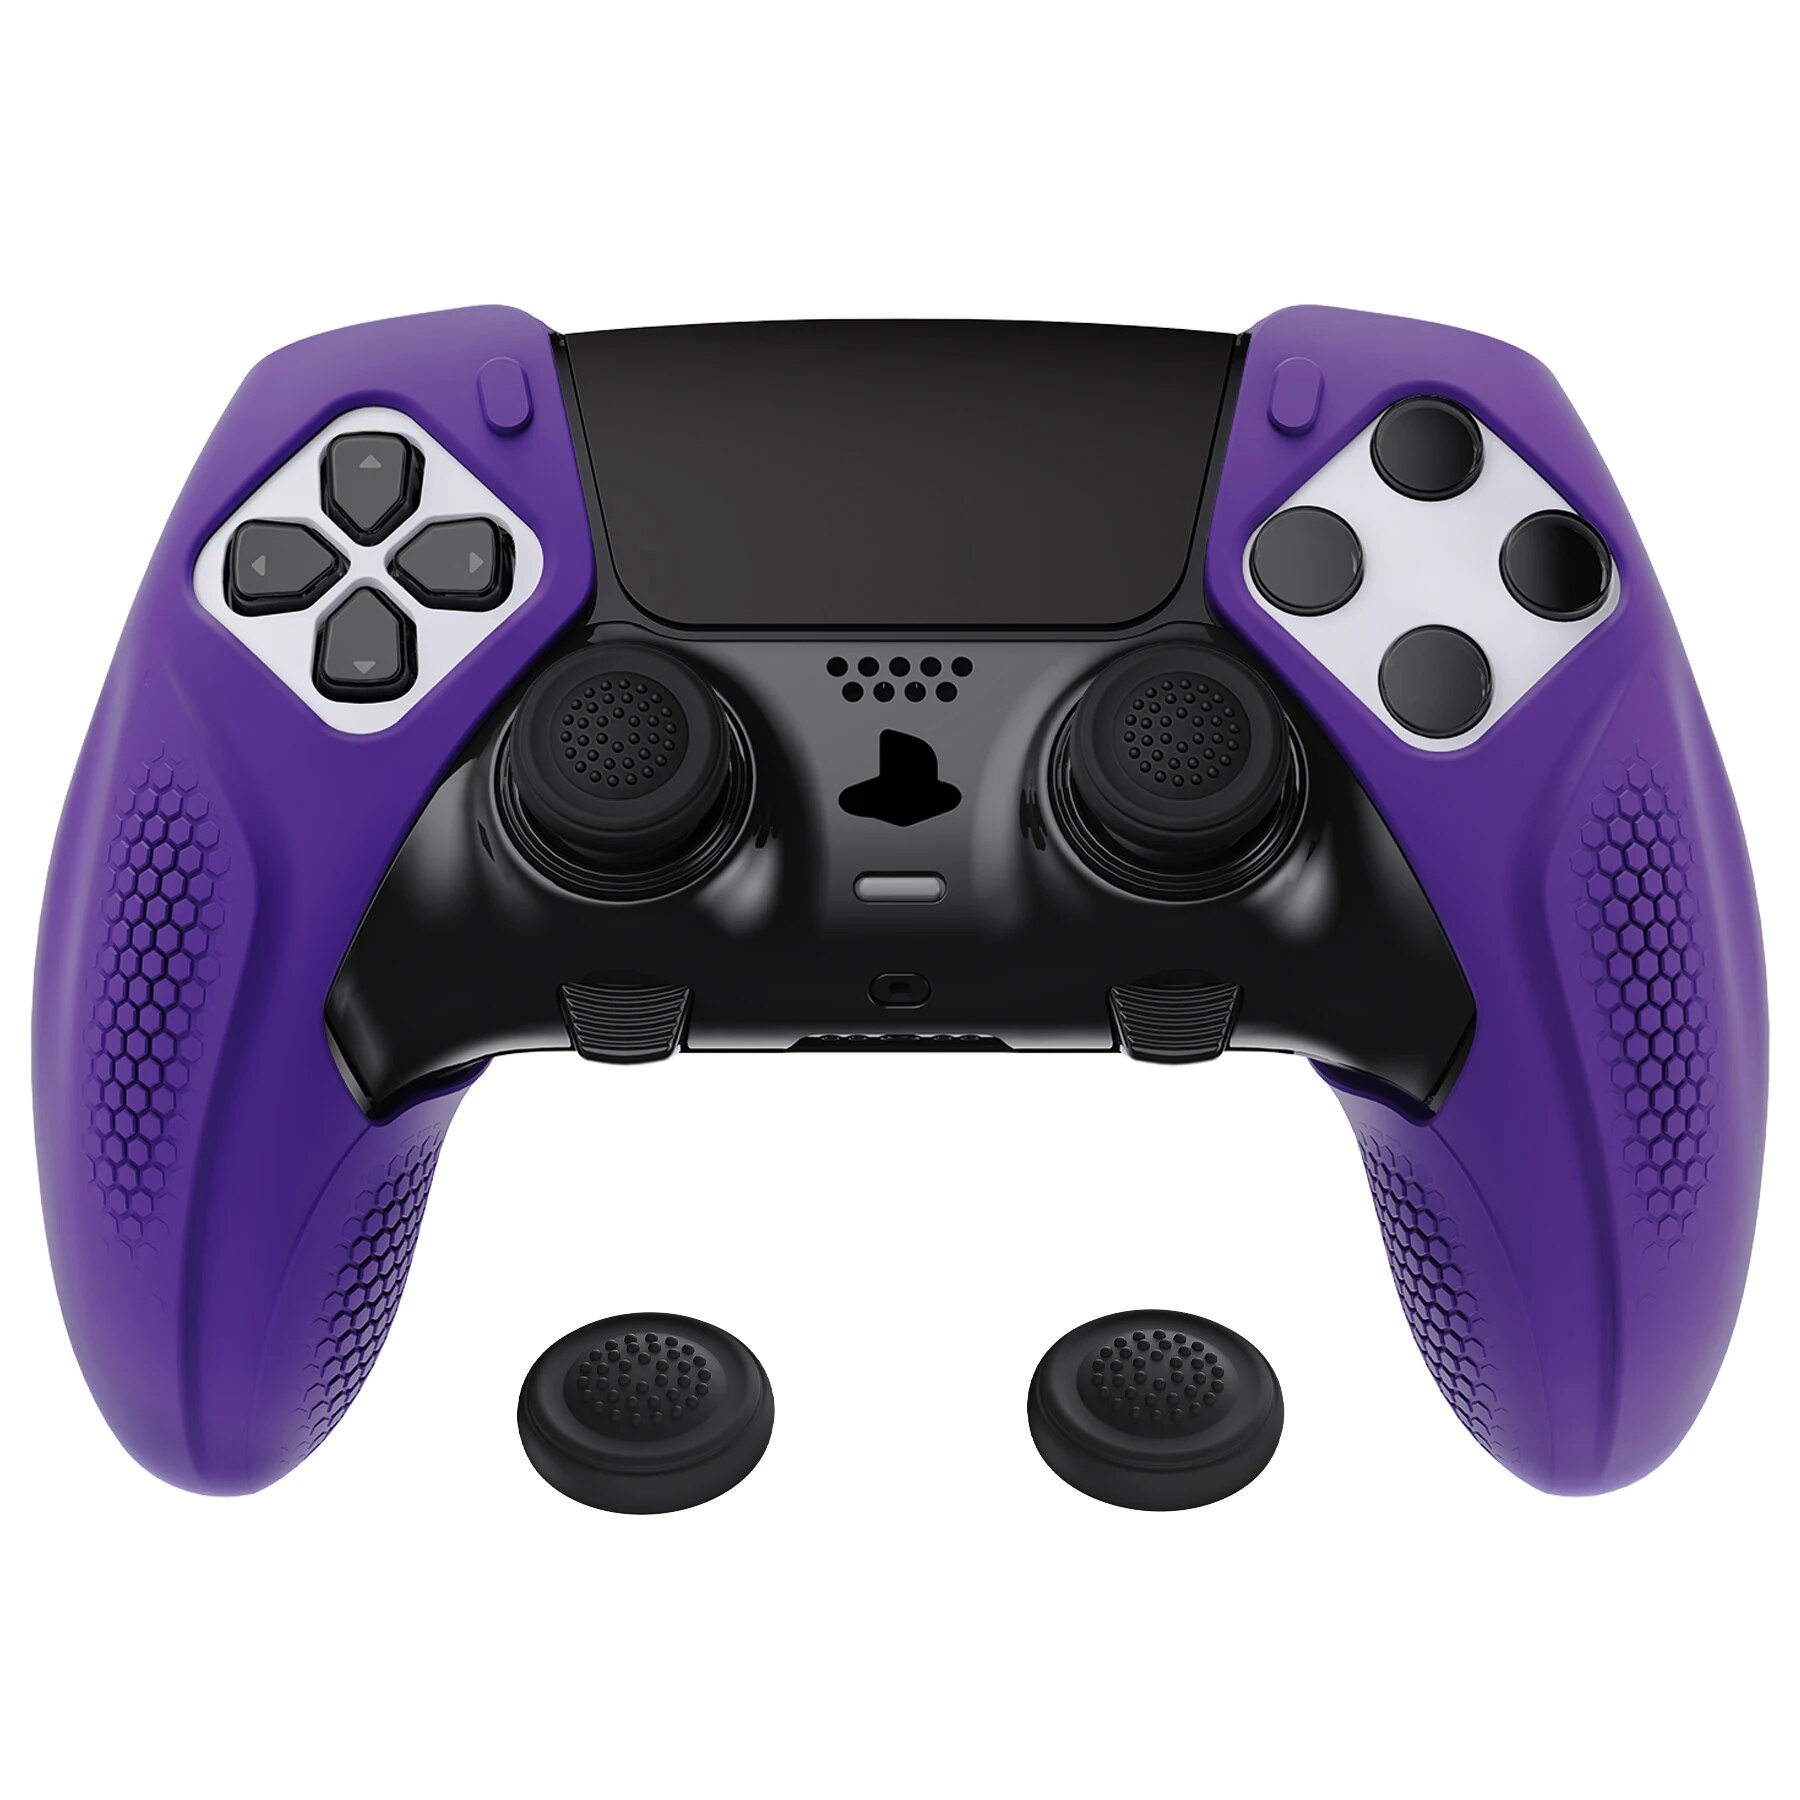 【Exclusive】 Playvital Ninja Edition Anti-Slip Half-Covered Silicone Cover Skin For Ps5 Edge Controller Soft Protector - Purple